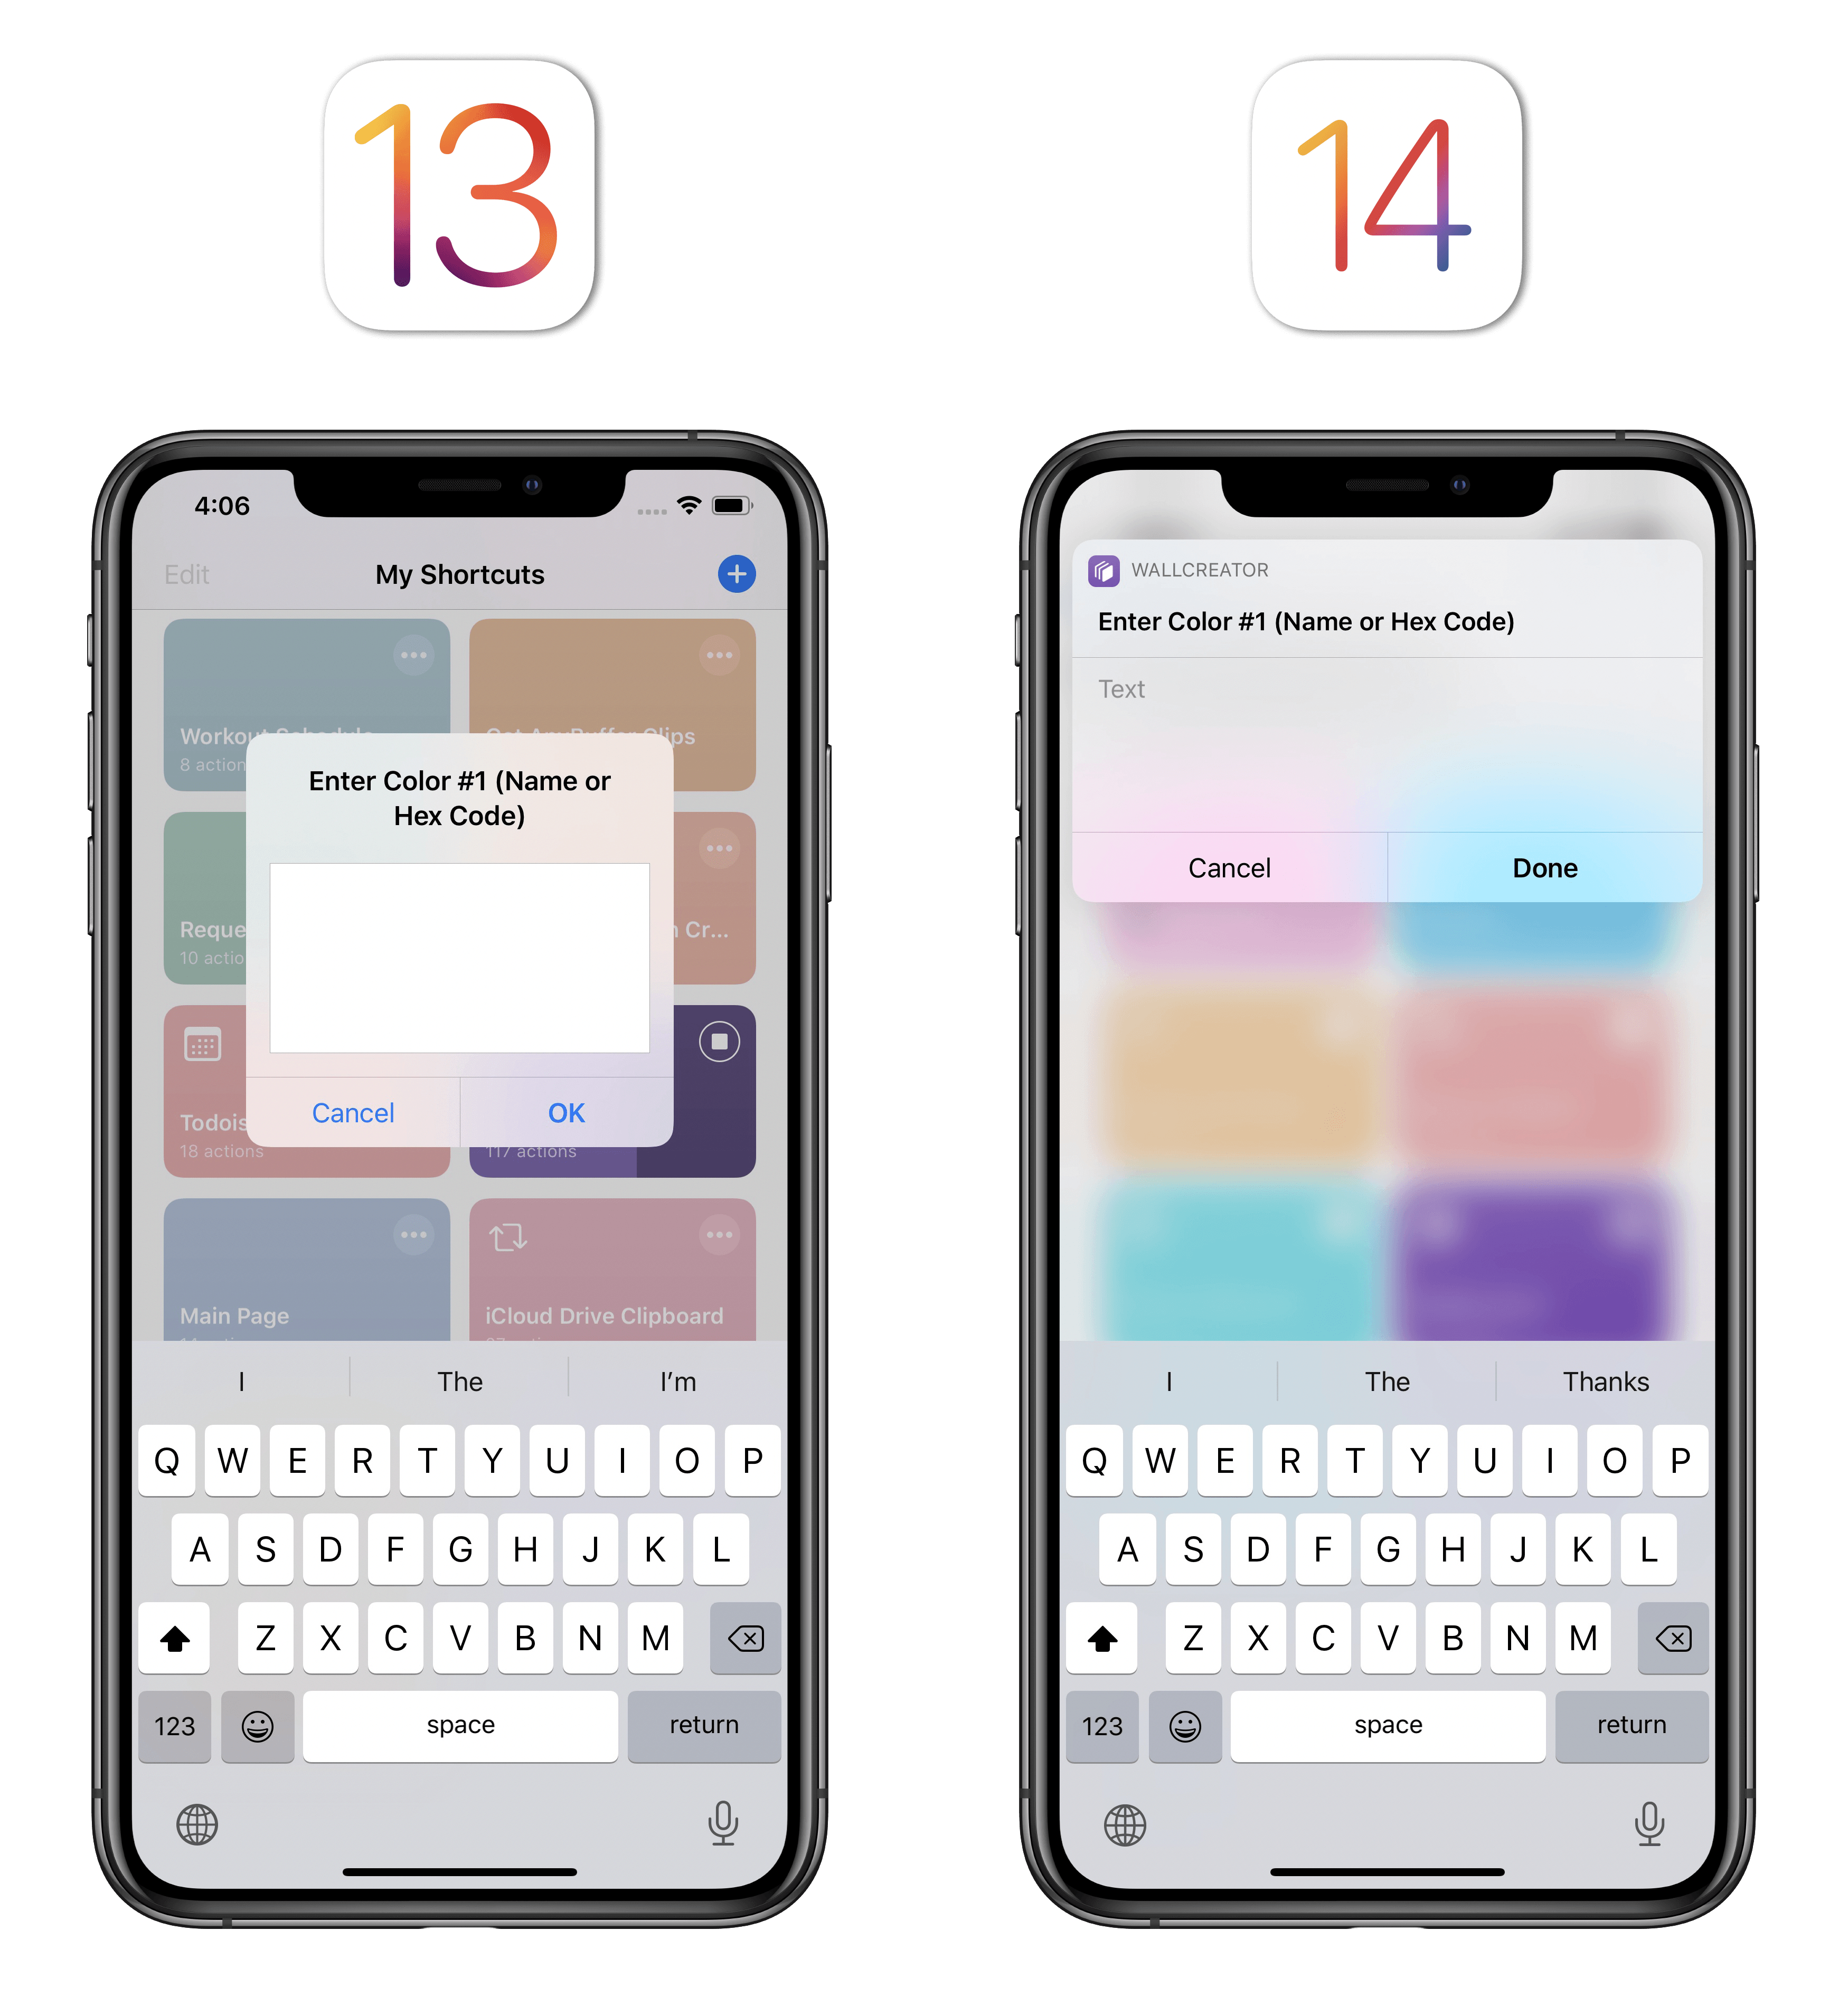 When running inside the Shortcuts app, actions are more compact, but the background is blurred.